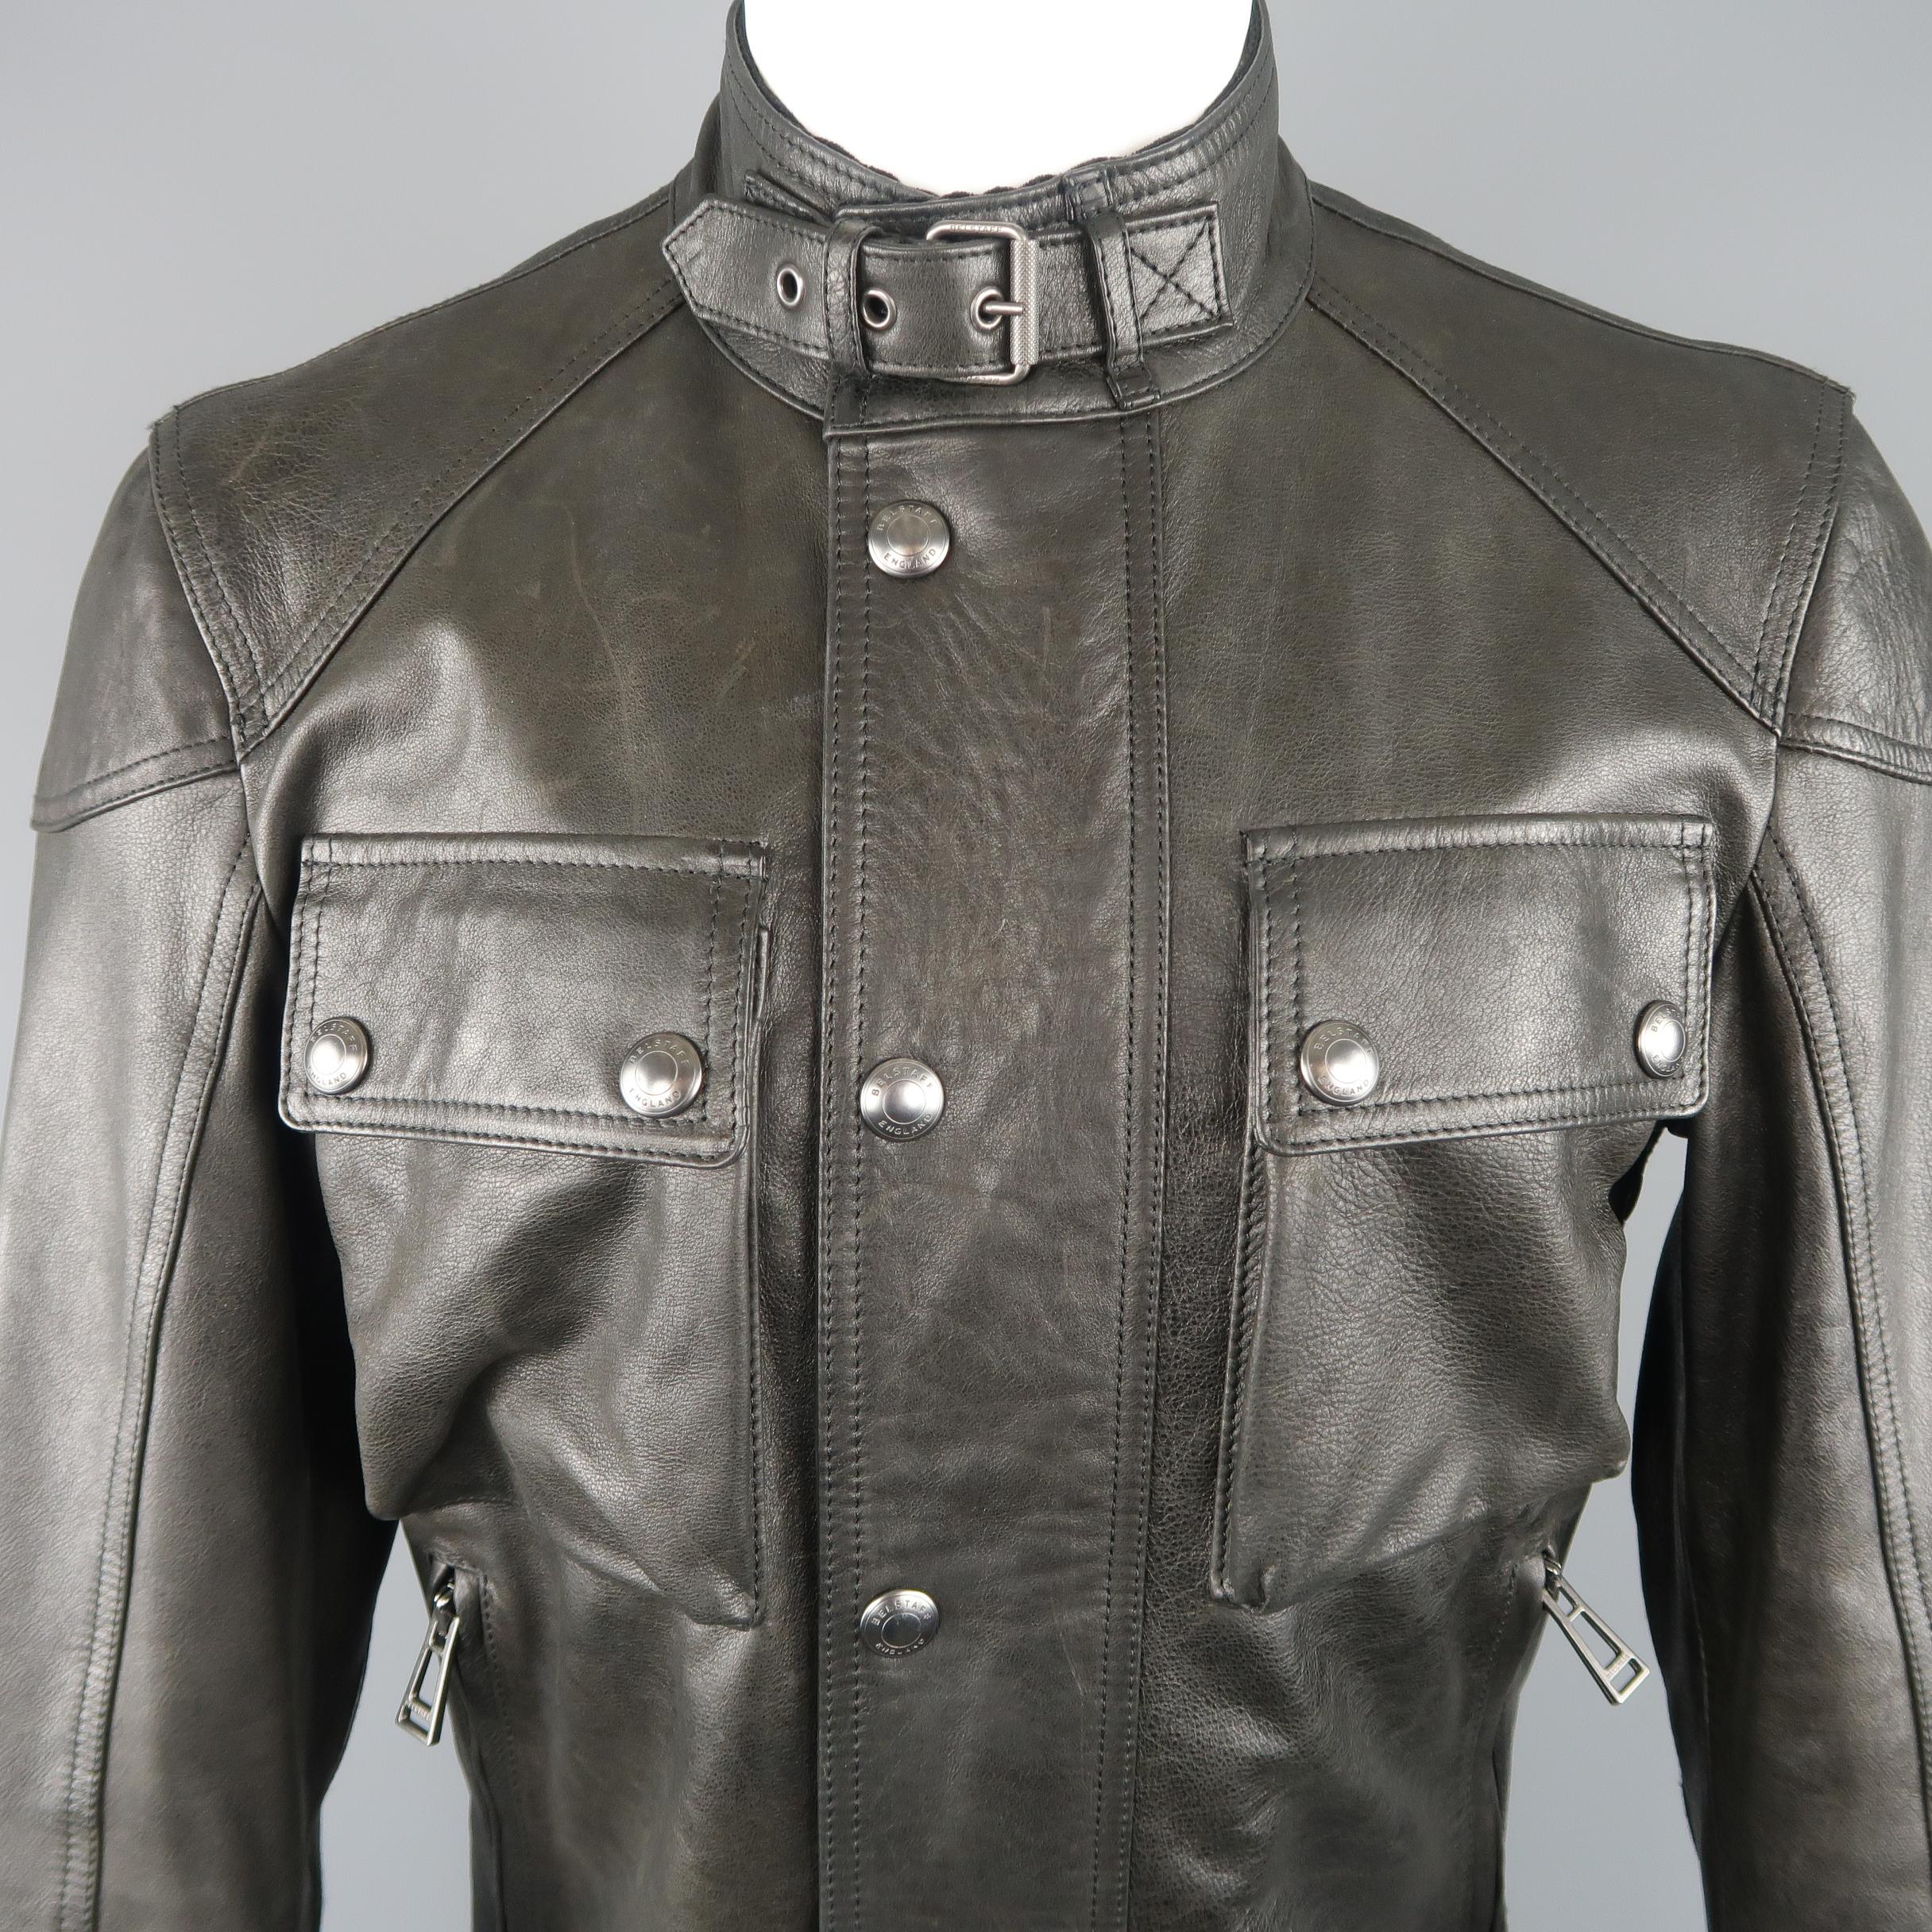 BELSTAFF Racemaster 'Gangster 2.0' biker jacket comes in black leather with a hgh buckled collar, zip closure with snap placket, zip pockets, patch flap chest pockets, and side tabs. Made in Italy.
 
Excellent Pre-Owned Condition.
Marked: IT 48
